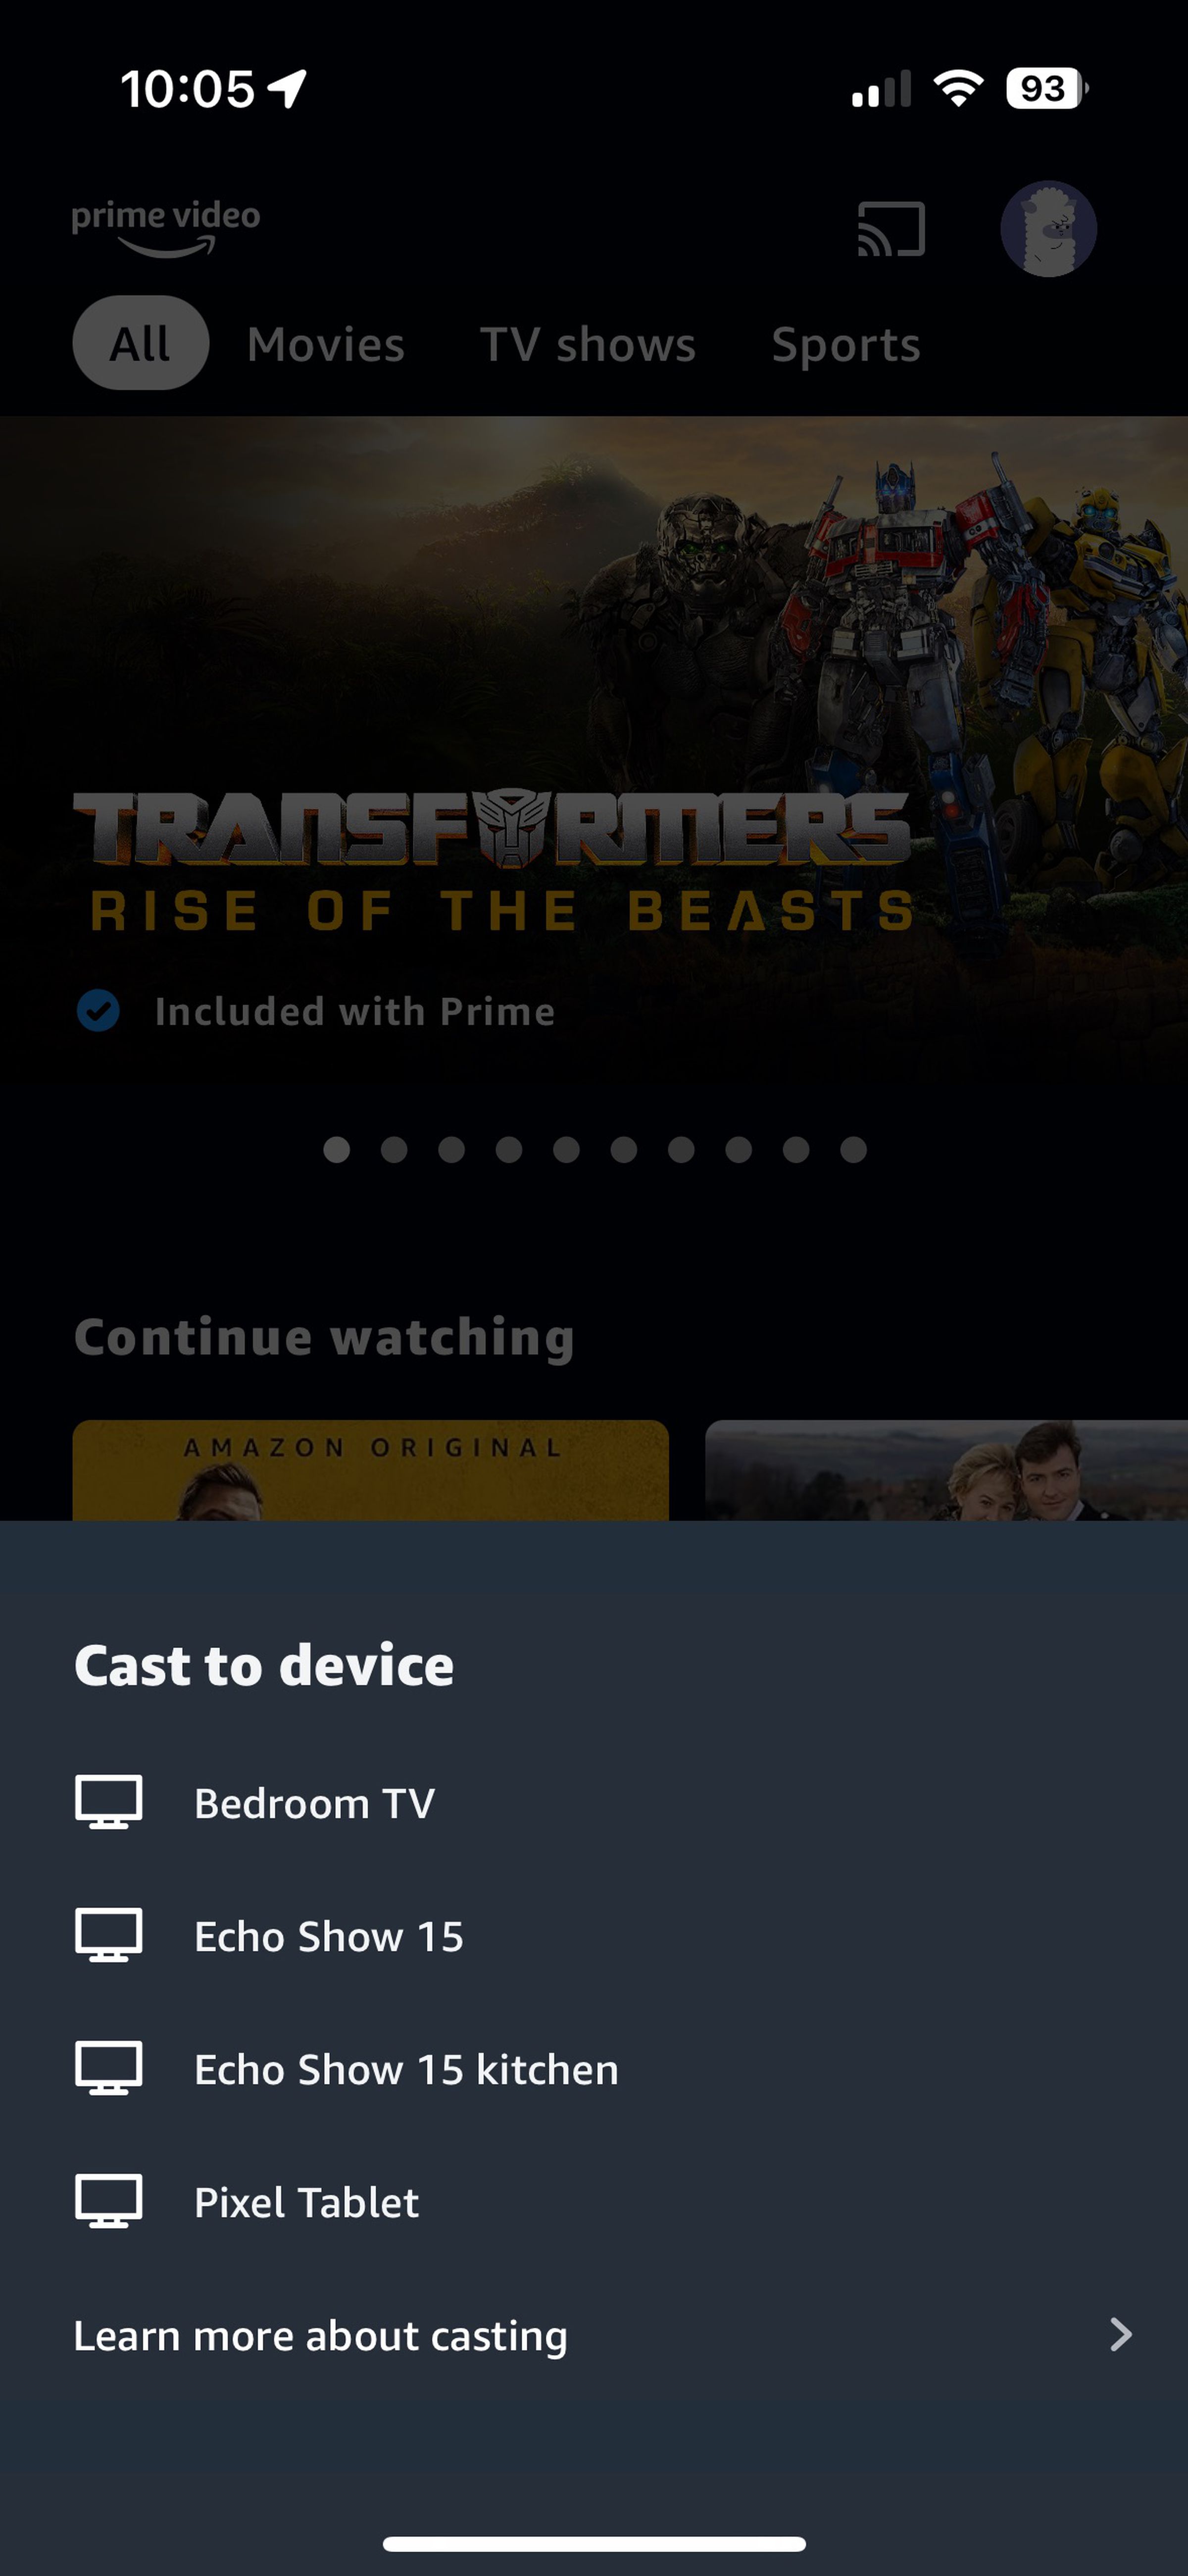 Casting options through the Prime Video app on an iPhone to a Pixel Tablet and Chromecast with Google TV device via Chromecast and to Echo Show 15 devices through Matter. 